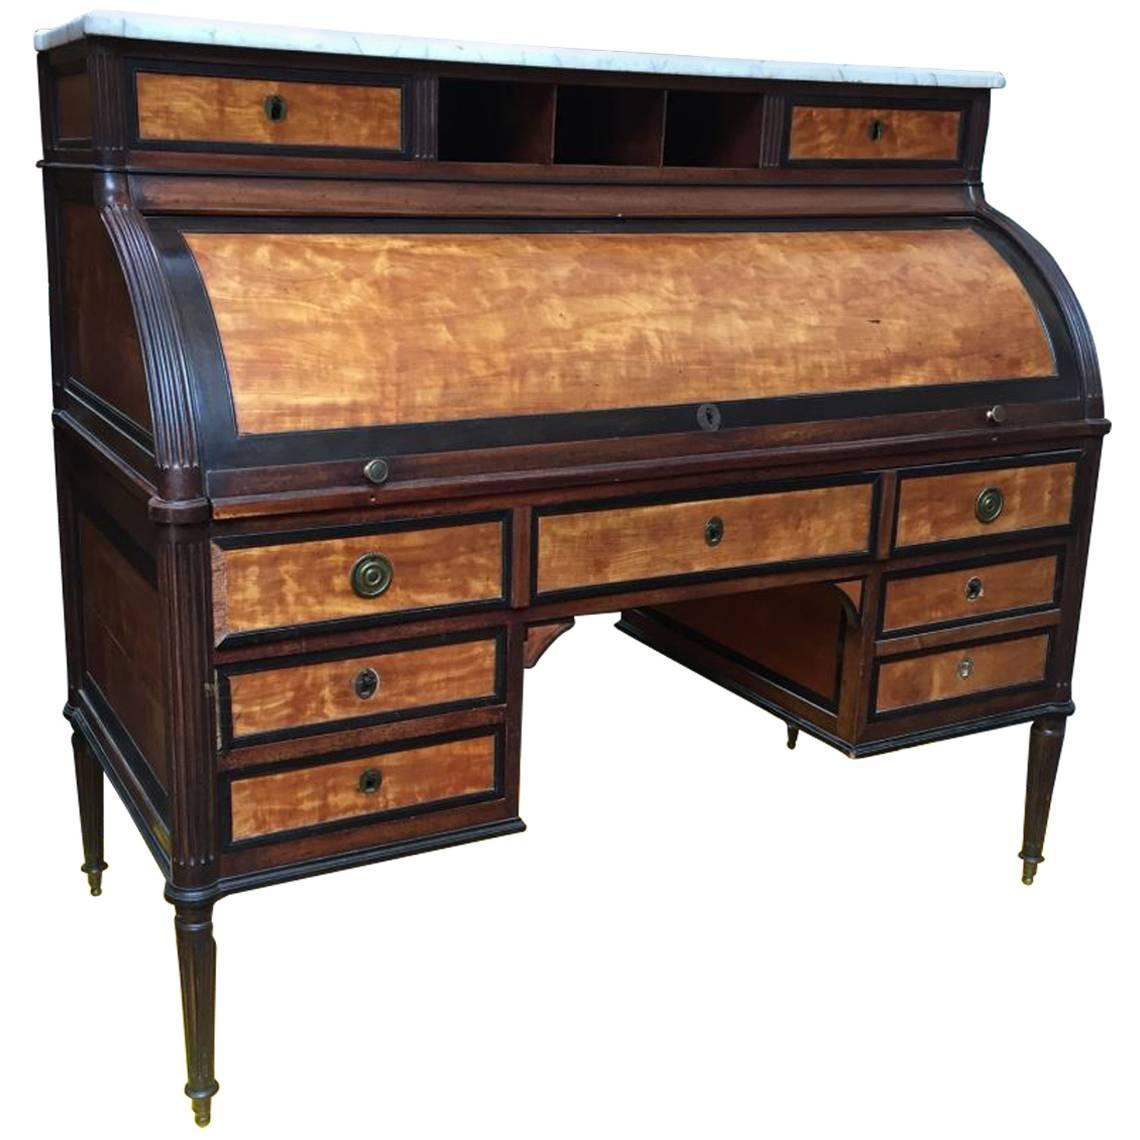 French Roll Top Desk in Wood and Marble from 19th Century